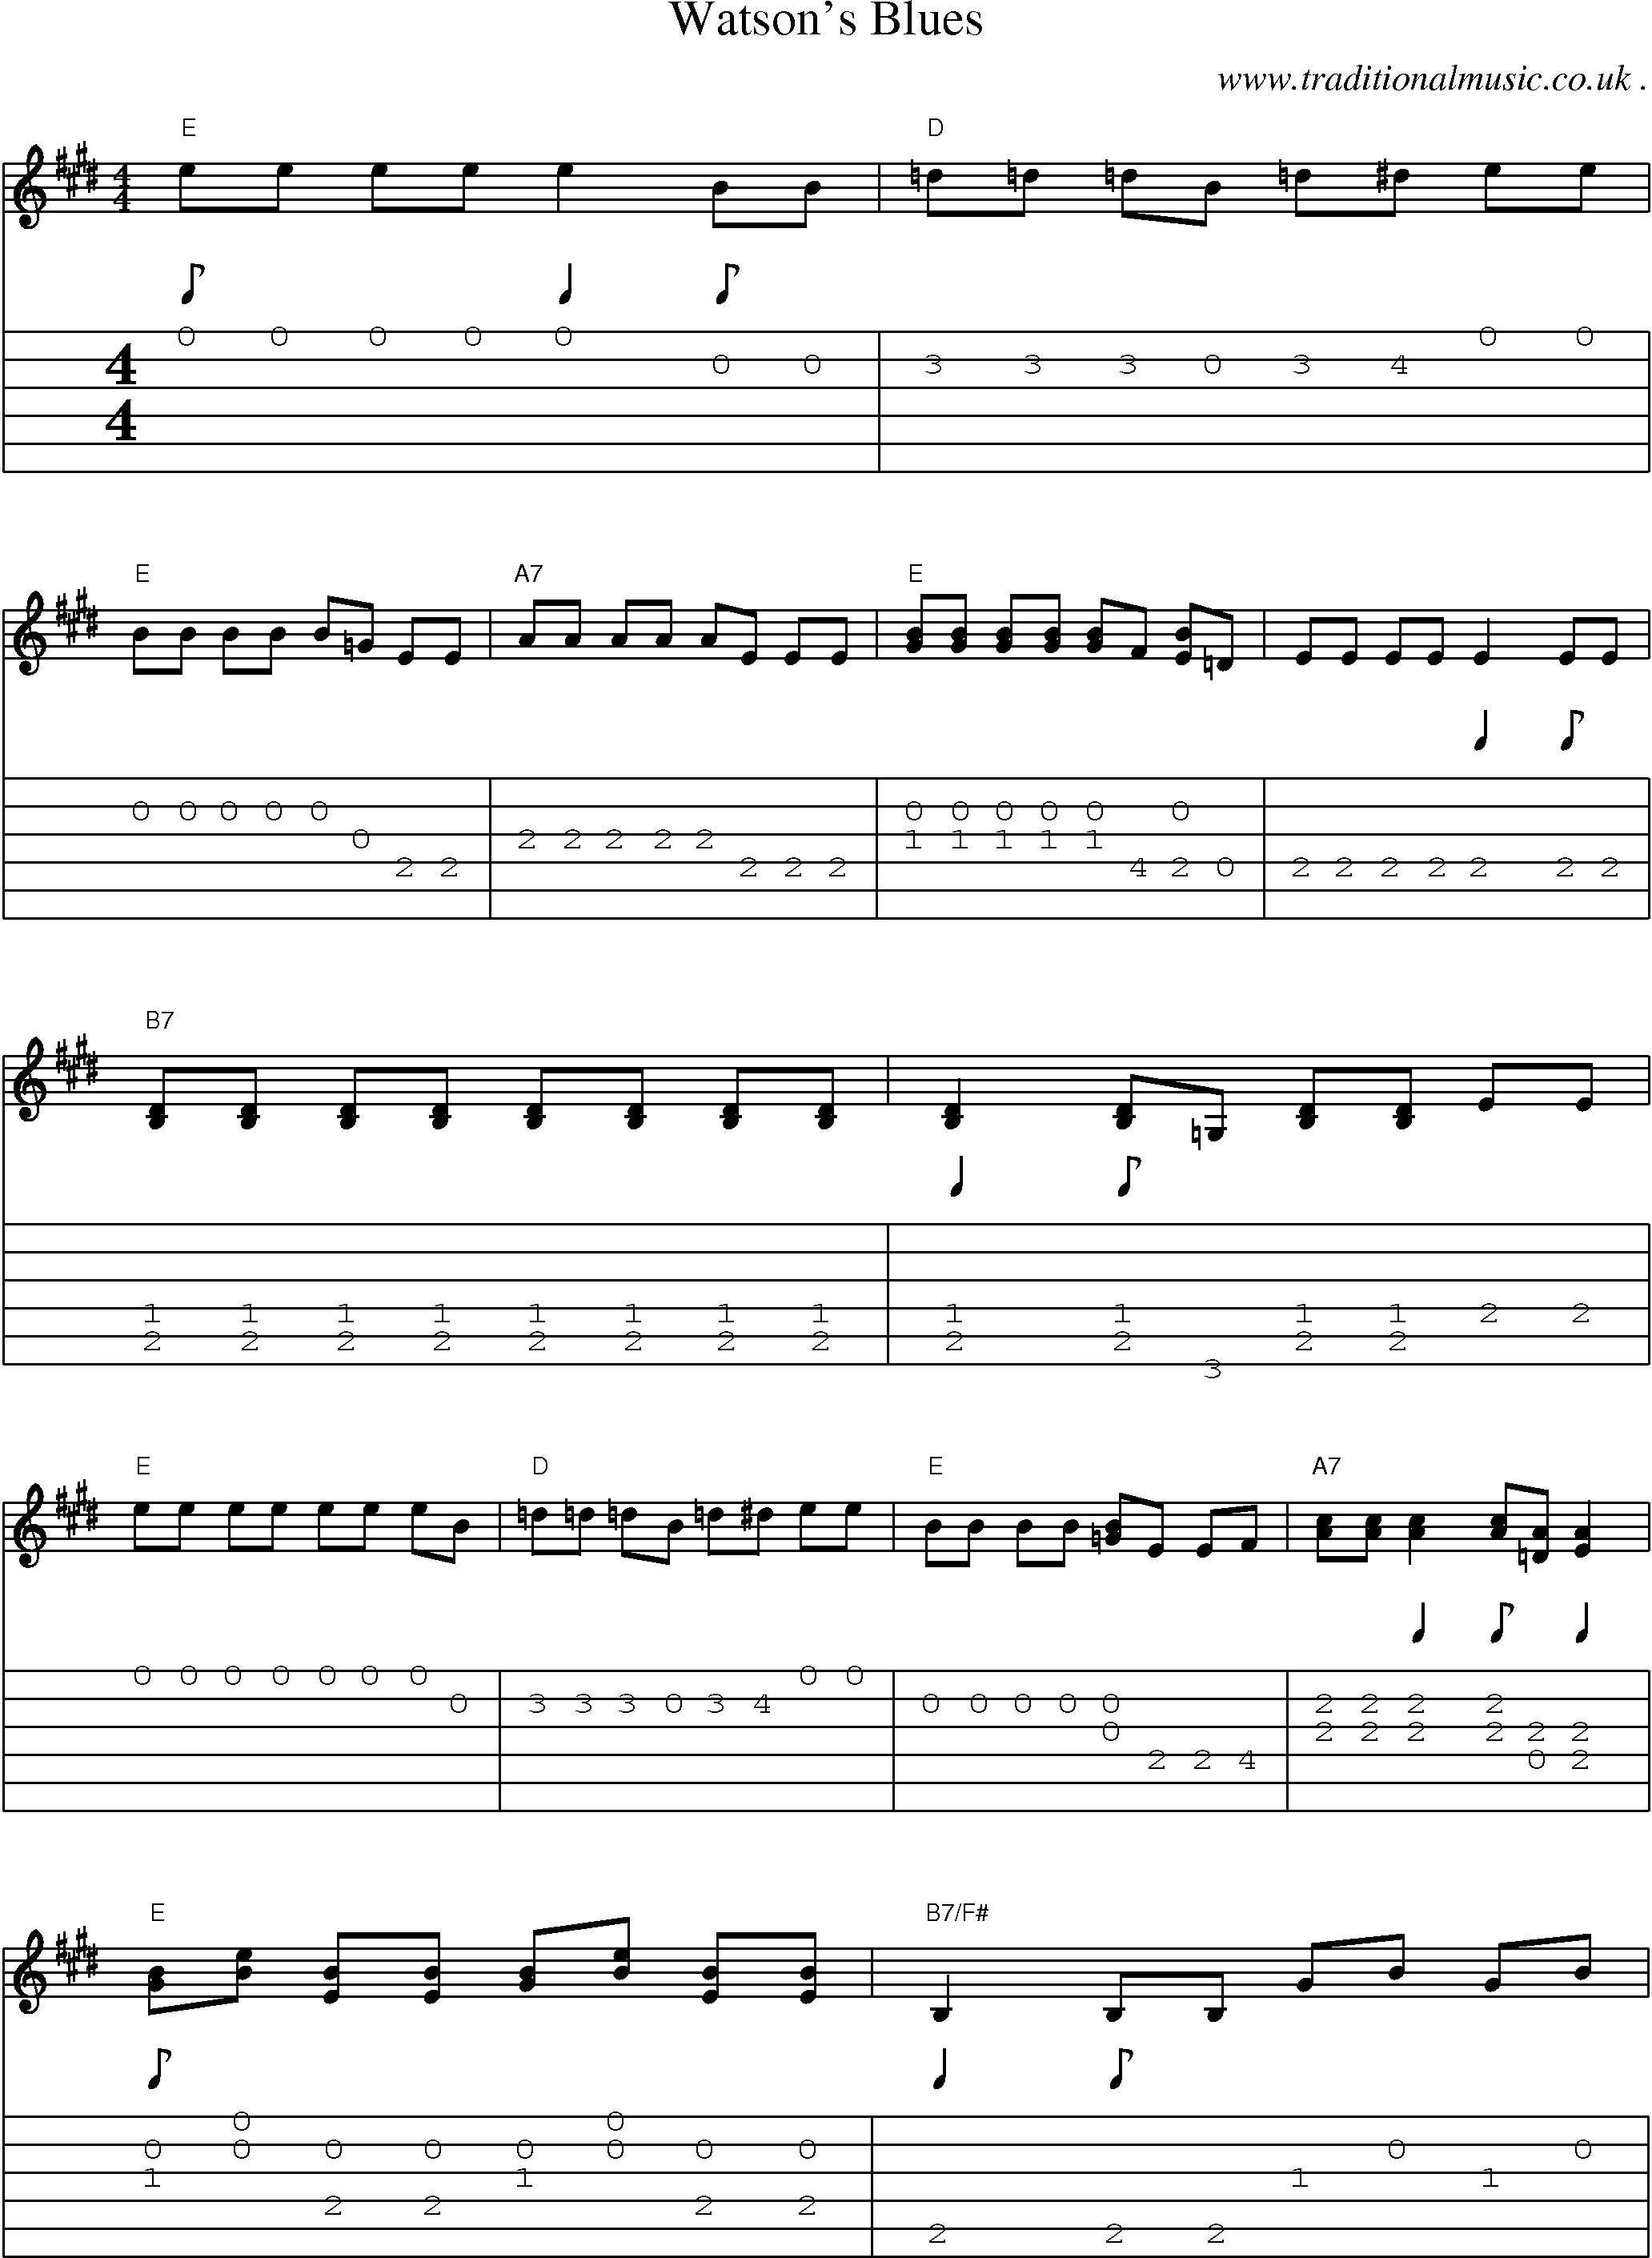 Music Score and Guitar Tabs for Watsons Blues